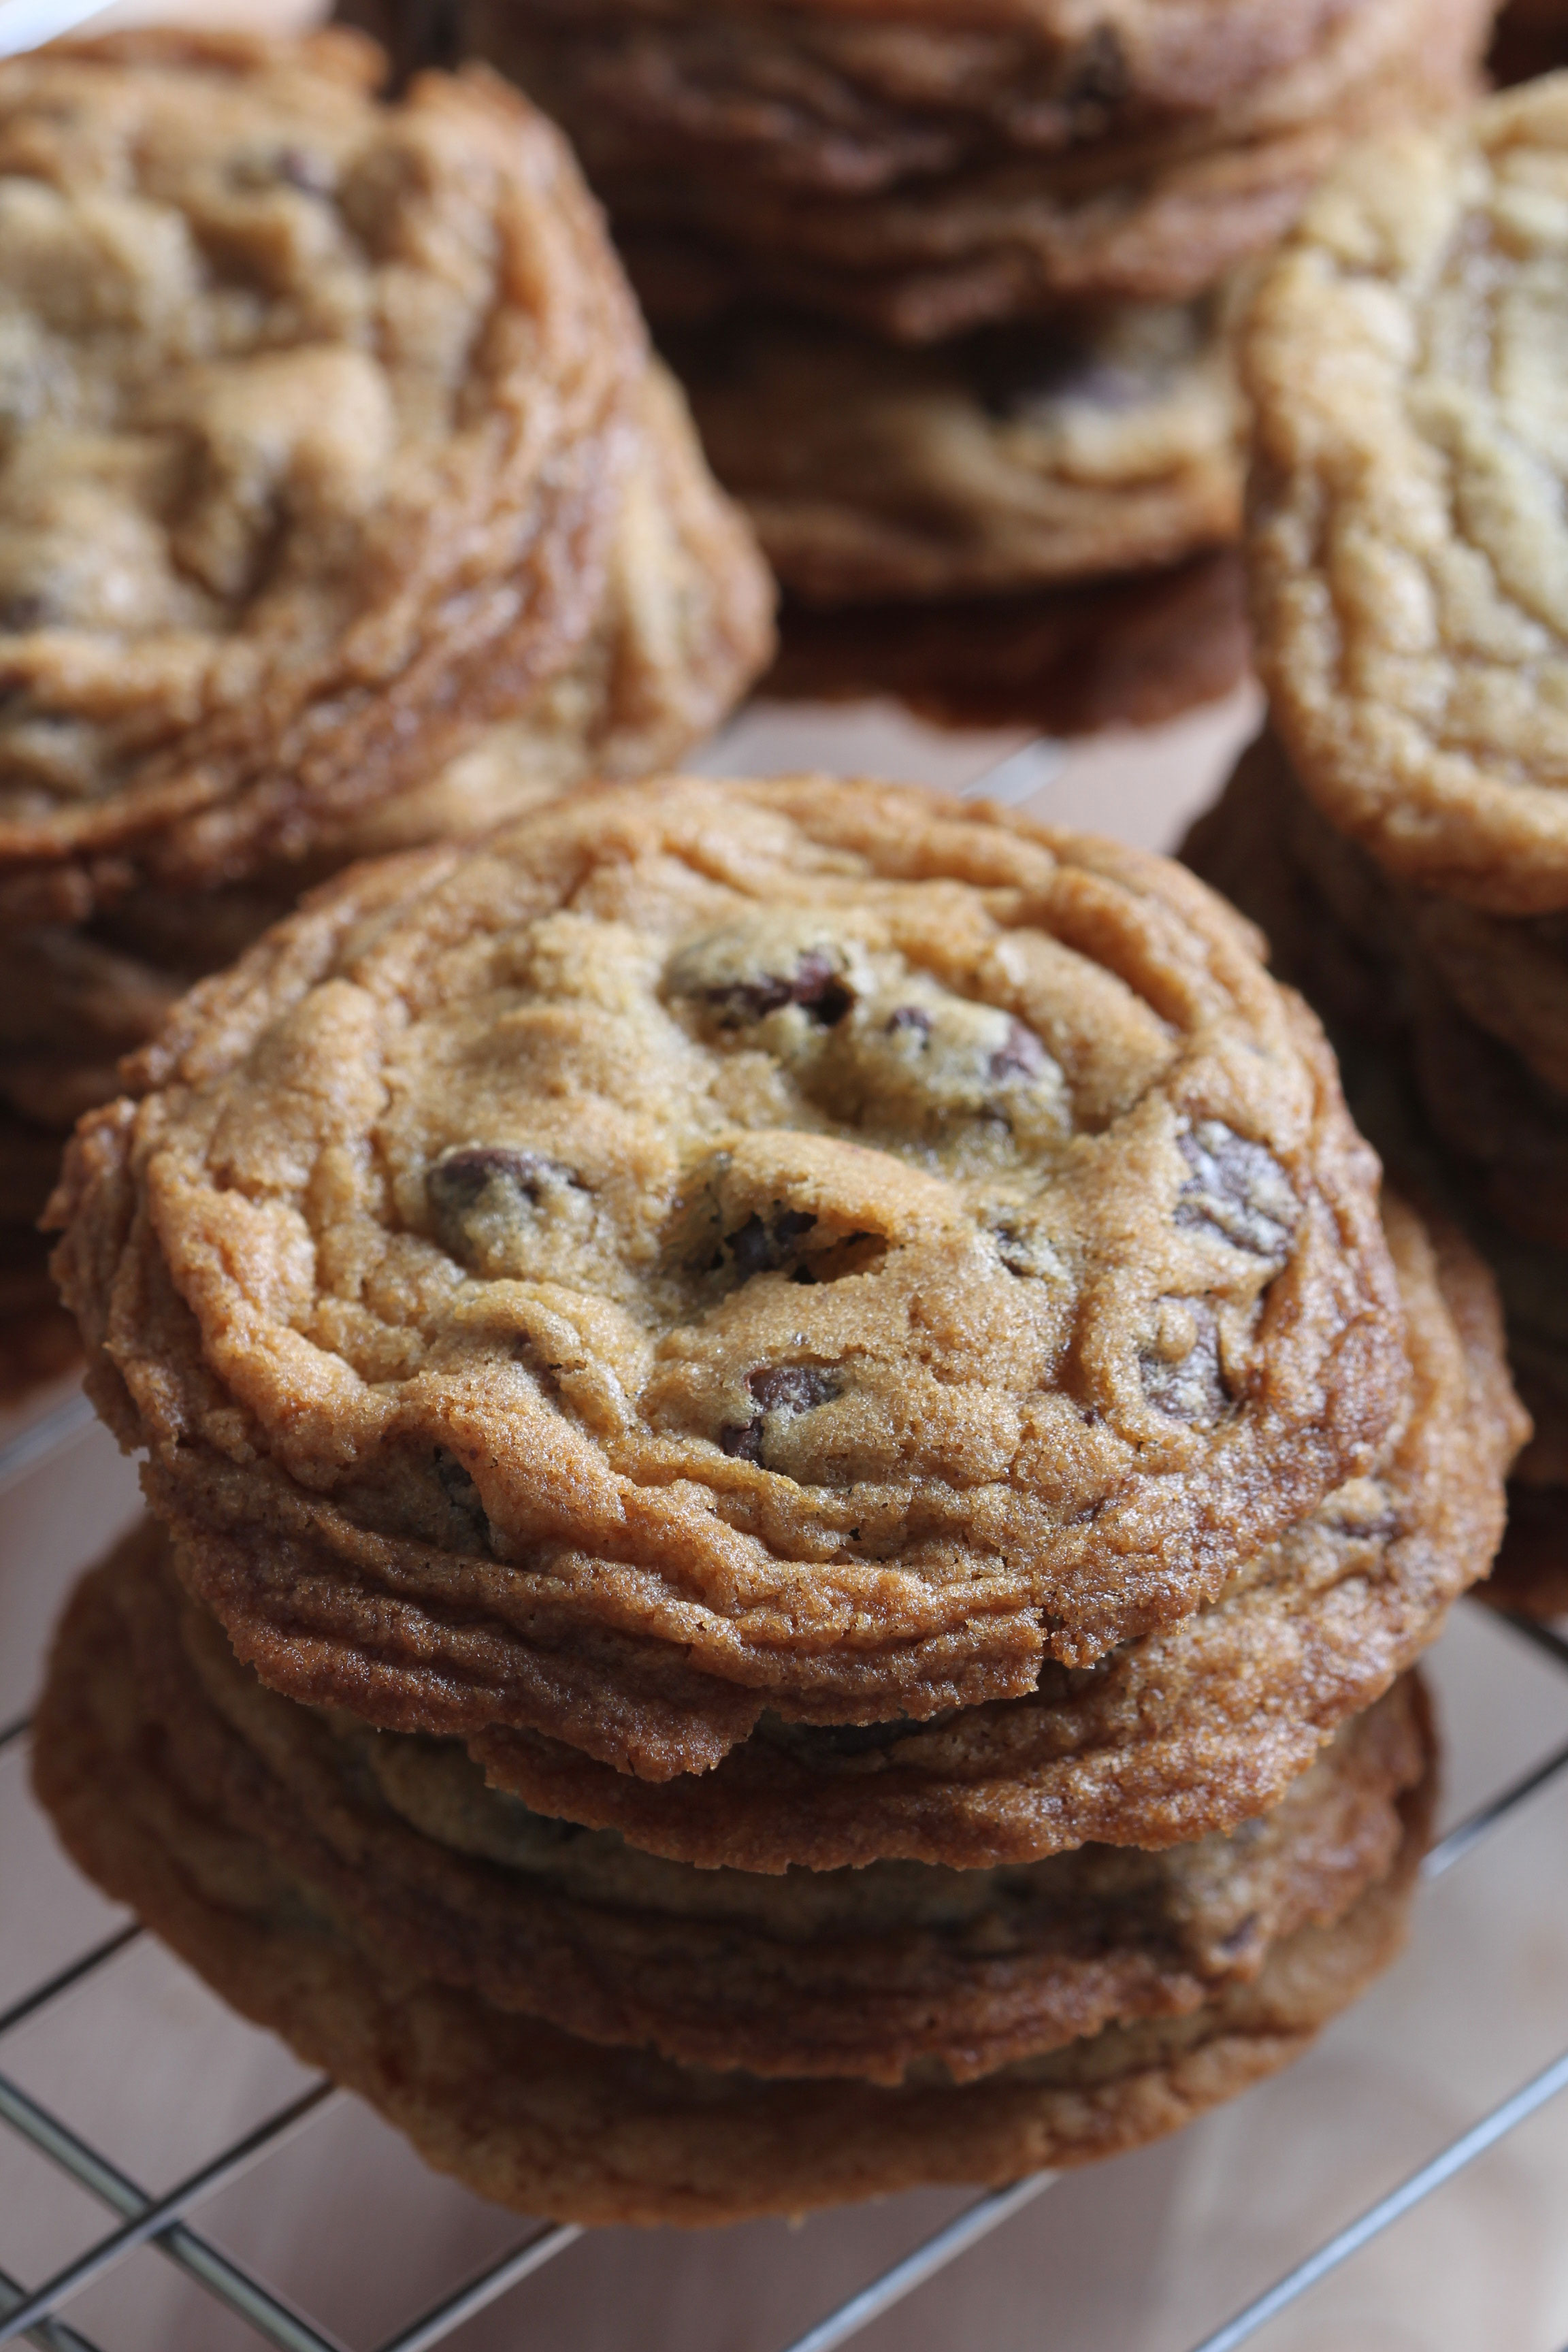 These are Best Chocolate Chip Cookies Ever.. Full of semi-sweet chocolate and a little sea salt to make the flavor pop. They are worth every bite!